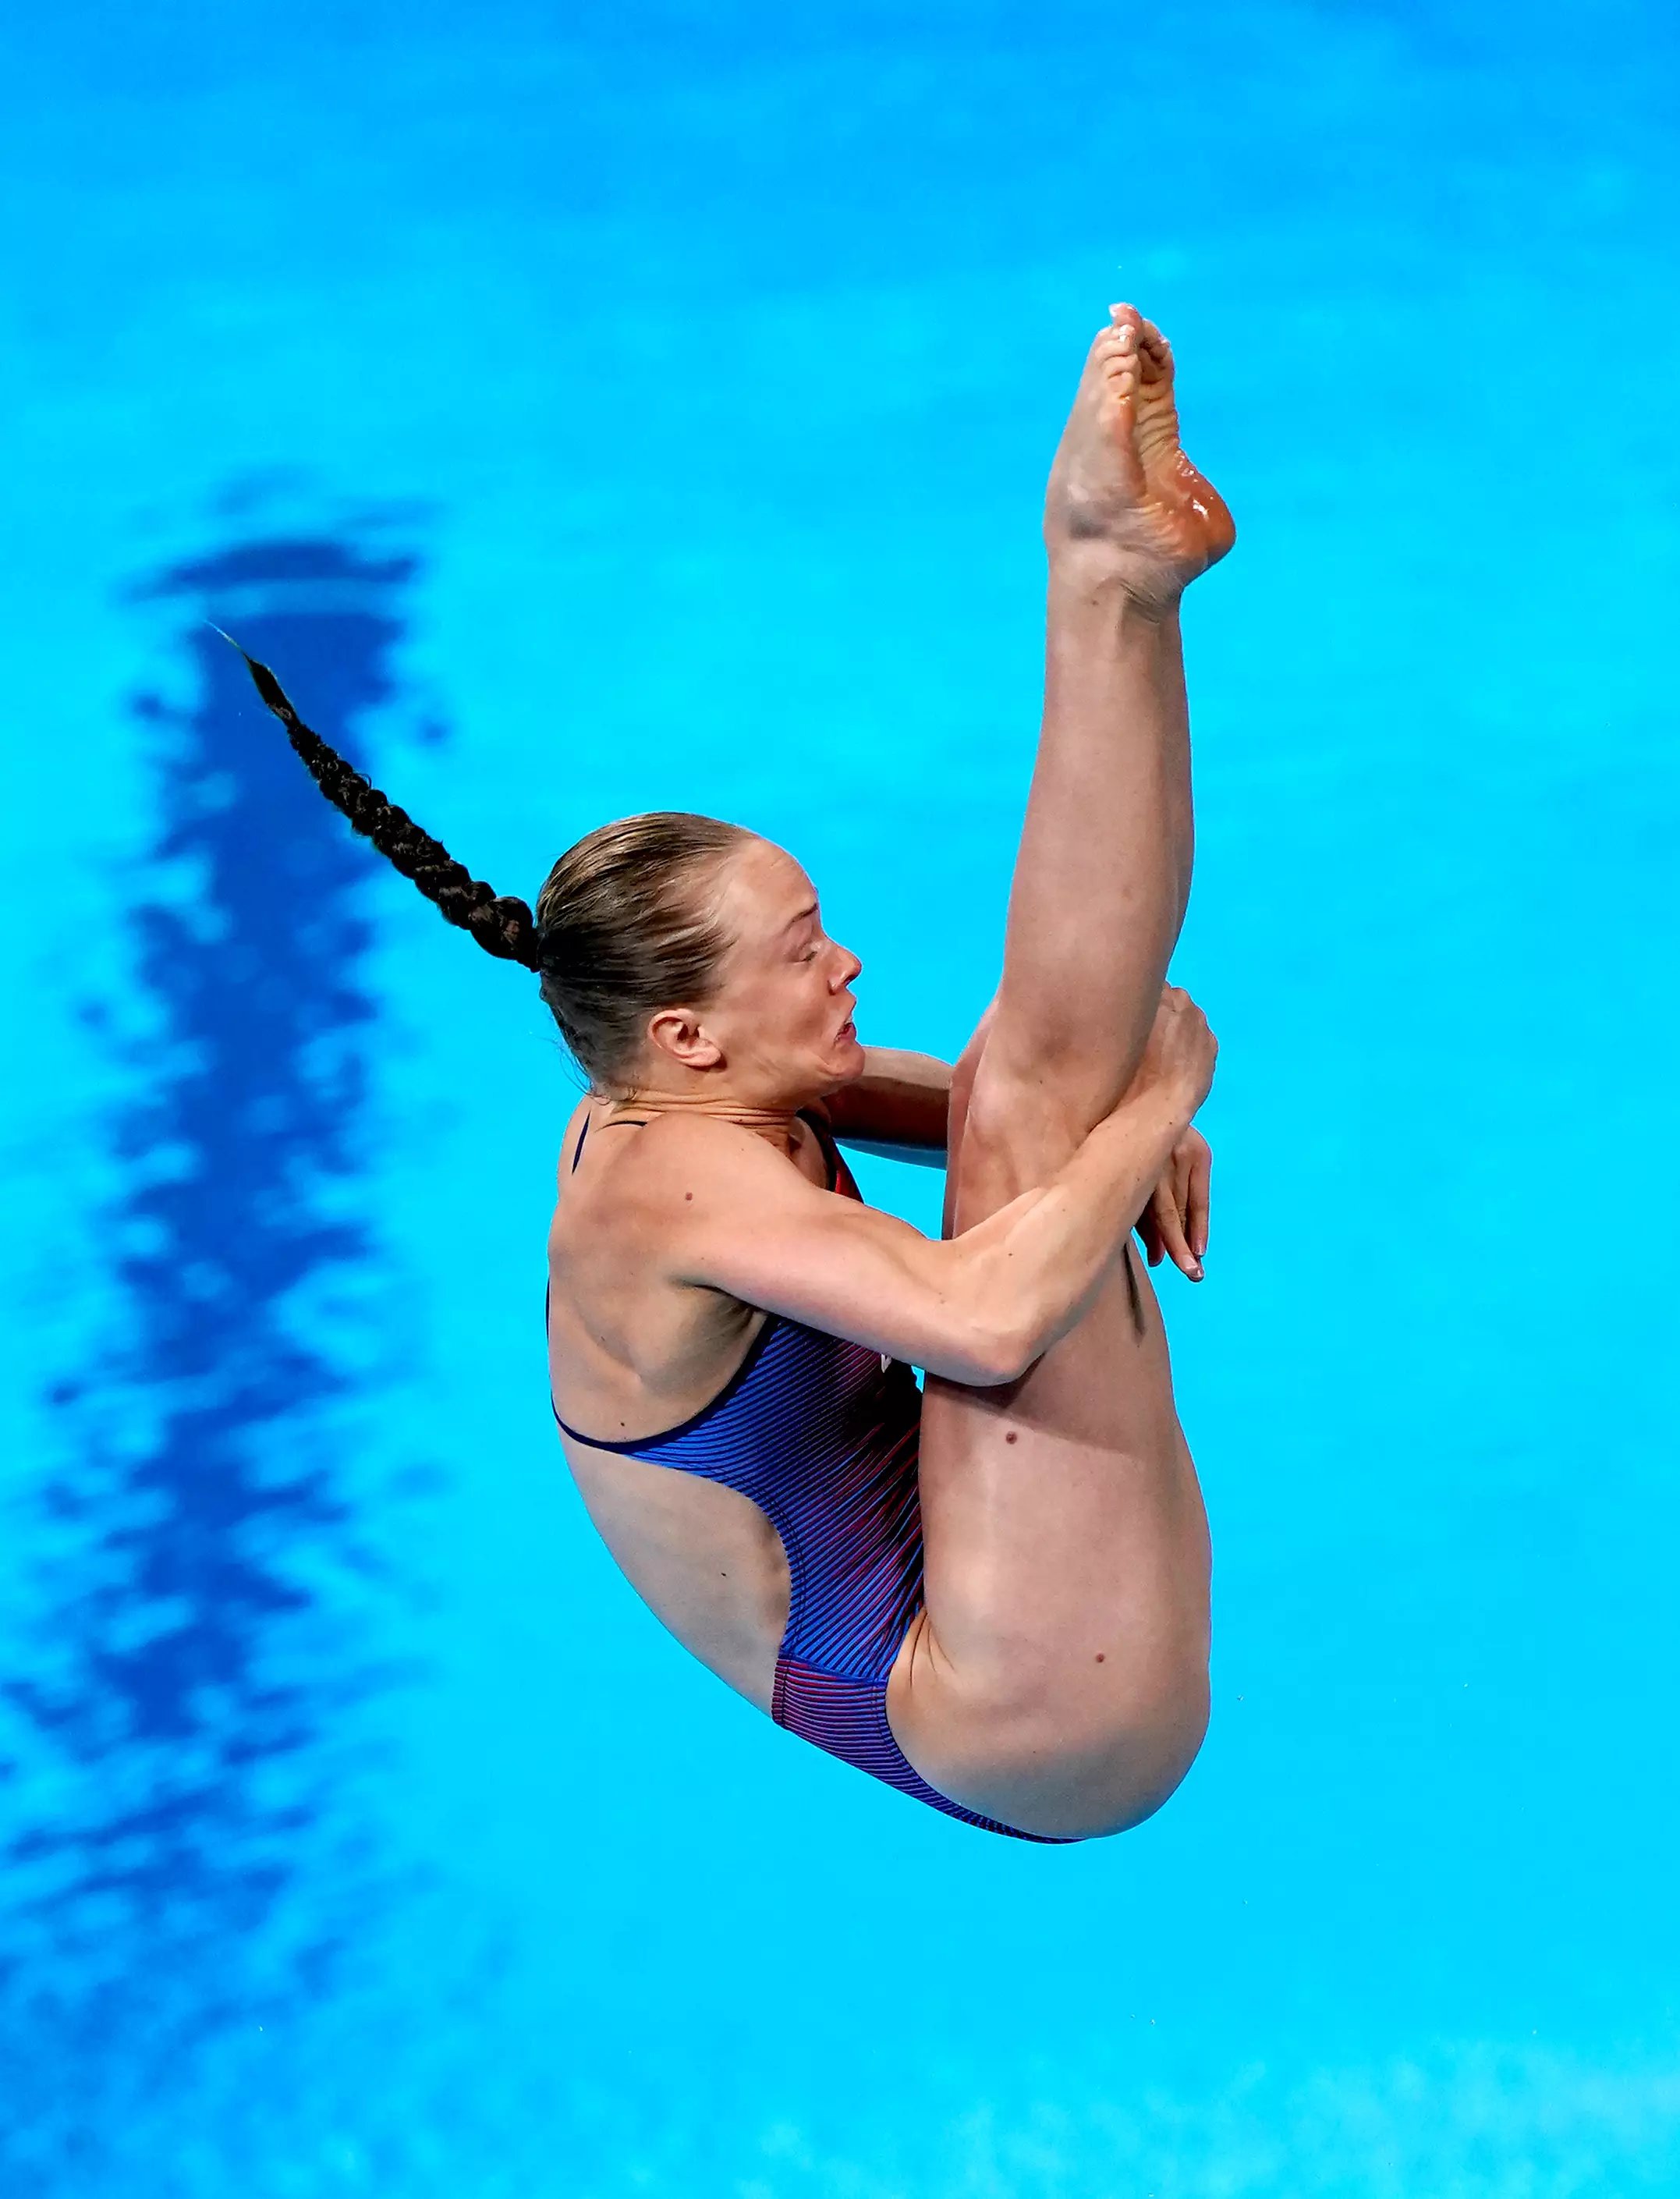 USA's Krysta Palmer competing in the Tokyo Olympics.